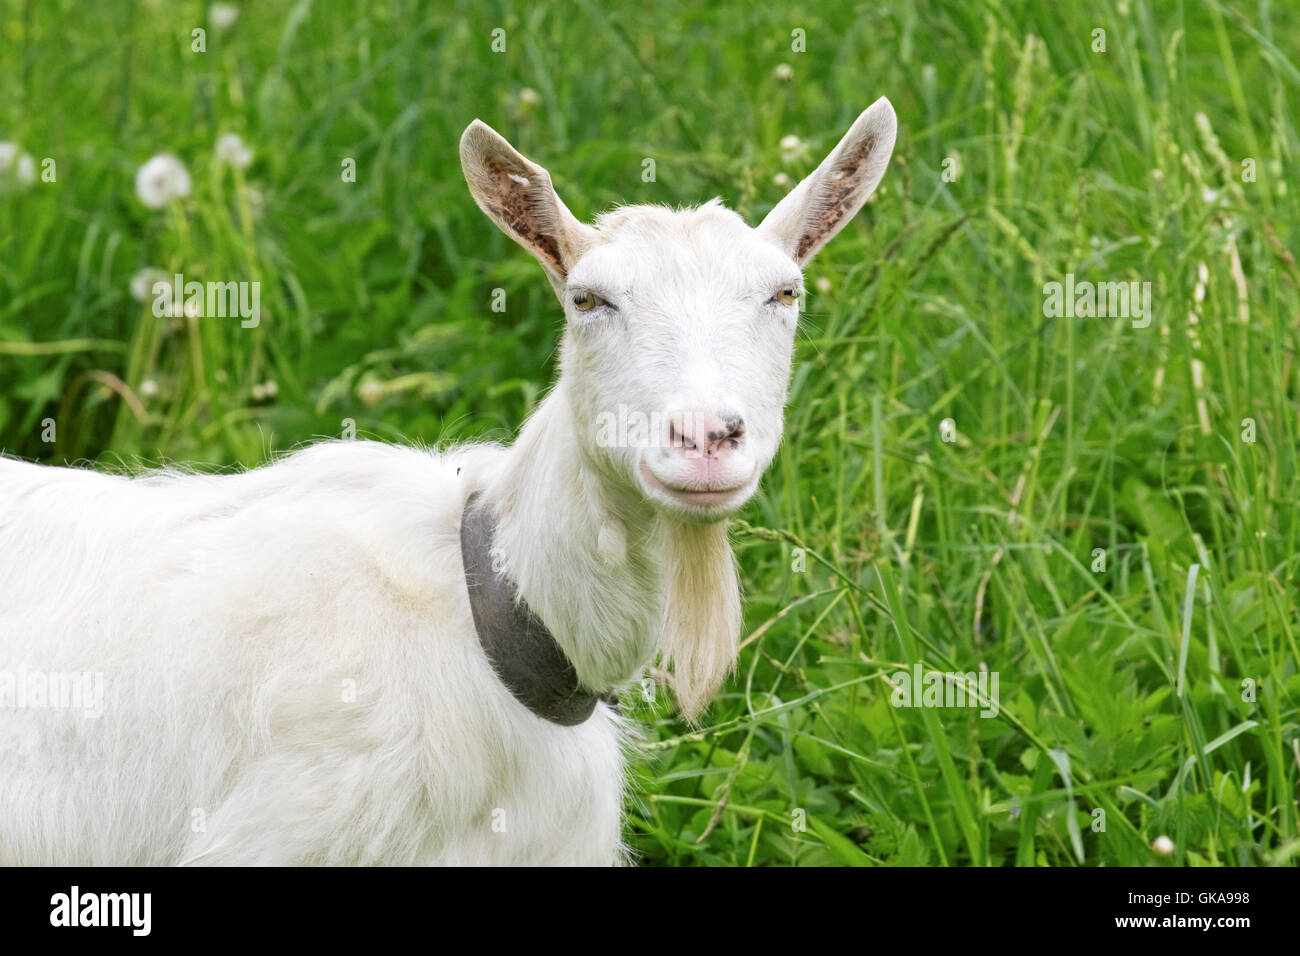 animal mammal agriculture Stock Photo